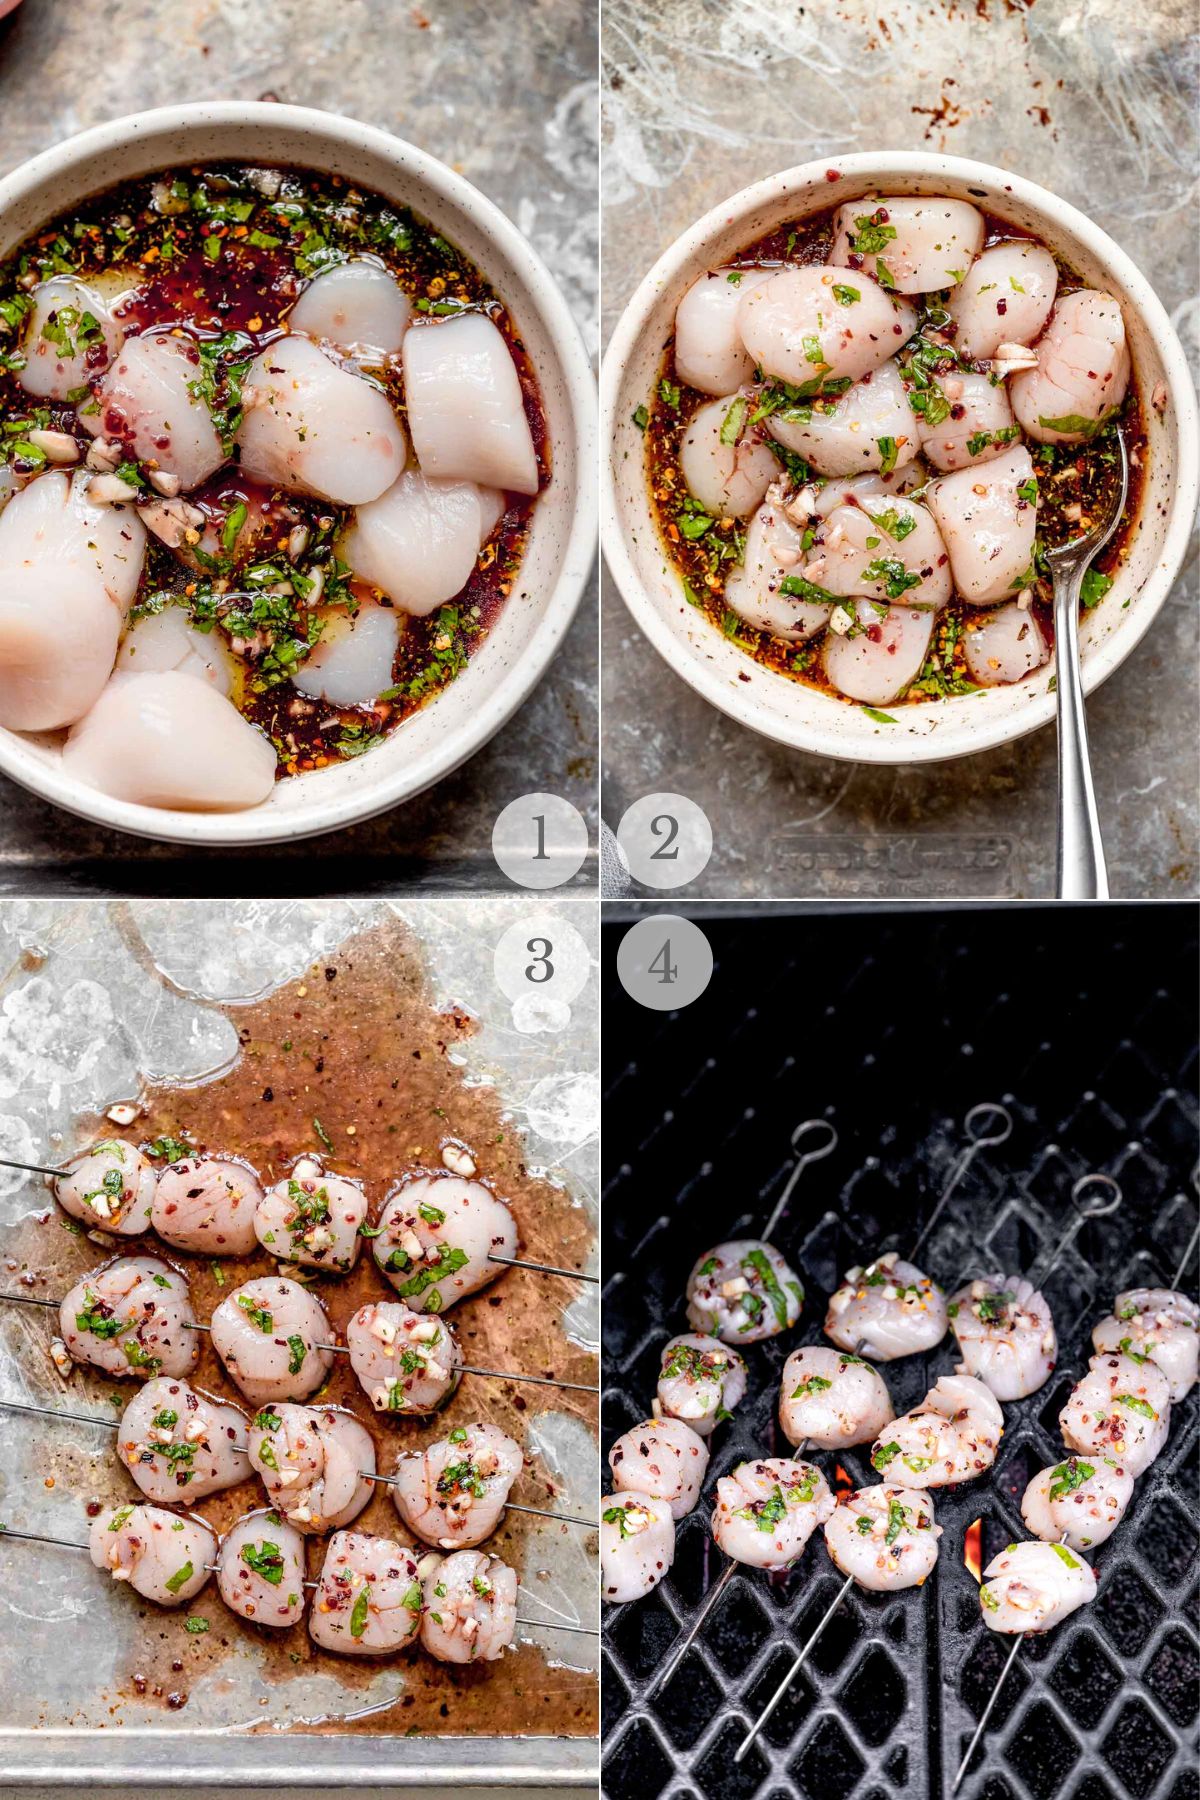 grilled scallops recipe steps 1-4.